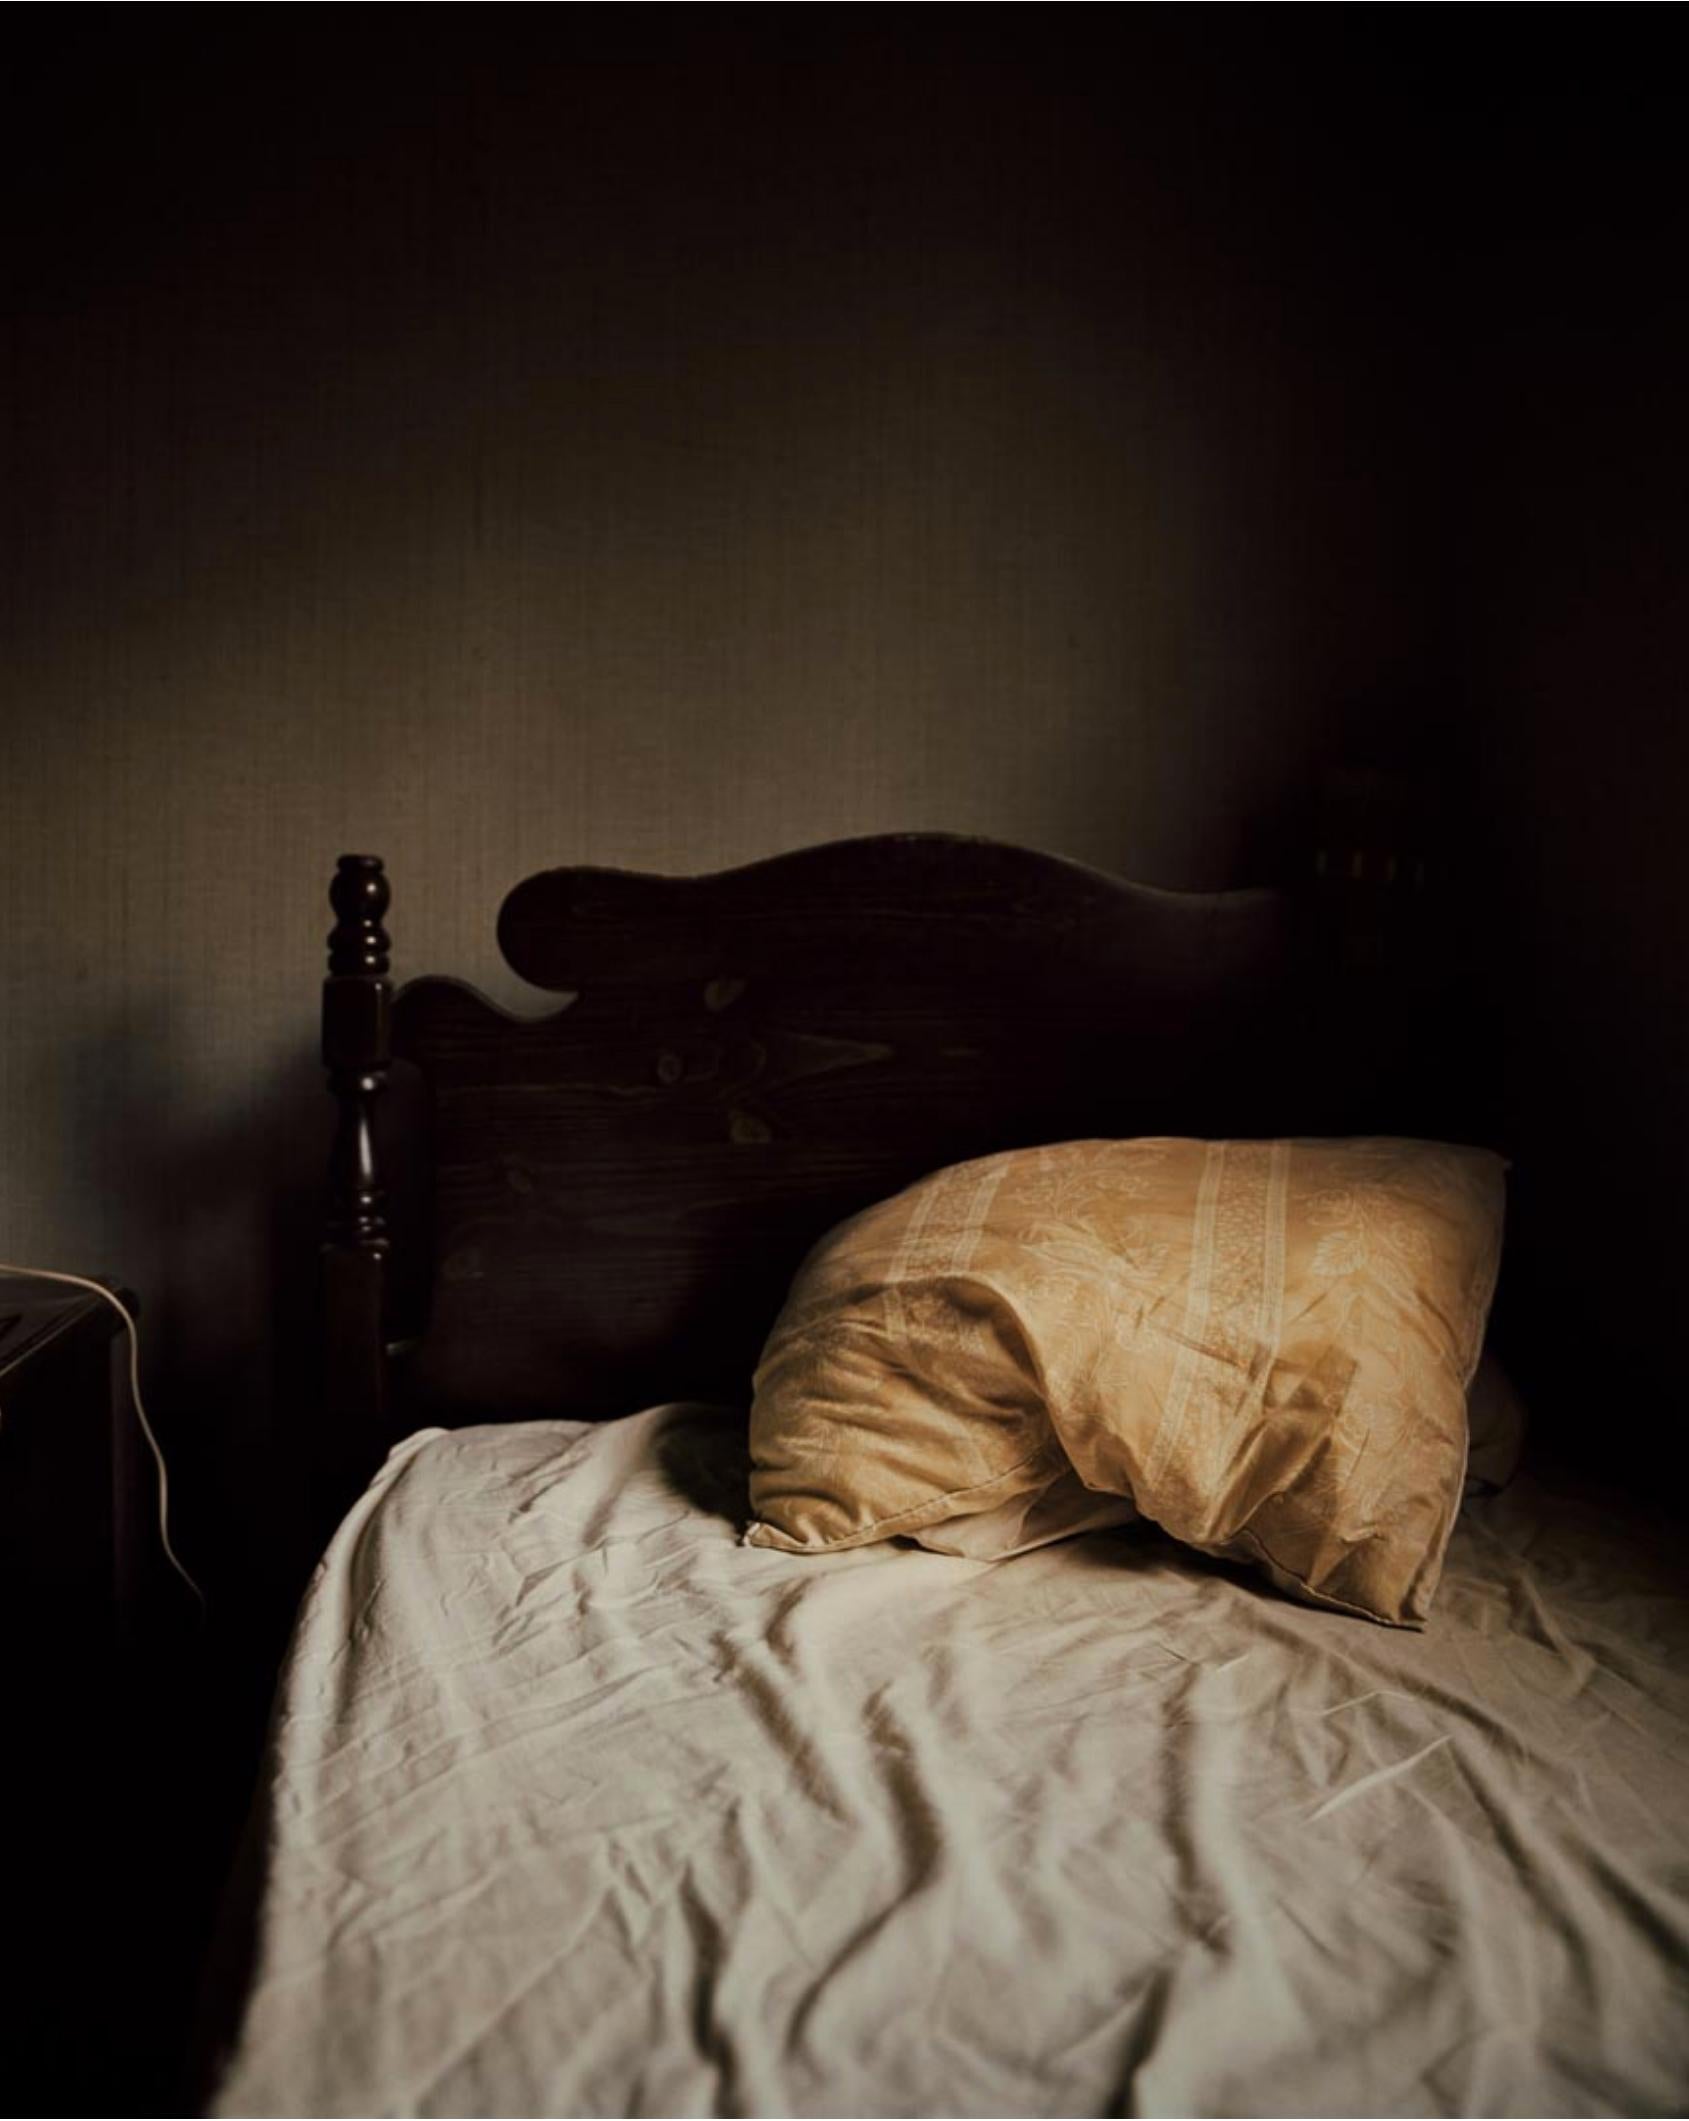 #1447-a, 1994 - Todd Hido (Colour Photography)
Signed, titled and dated on reverse
Archival pigment print

Available in two sizes:
38 x 30 inches, from an edition of 5 + 2 APs
48 x 38 inches, from an edition of 3 + 2 APs

Todd Hido (born 1968) is an